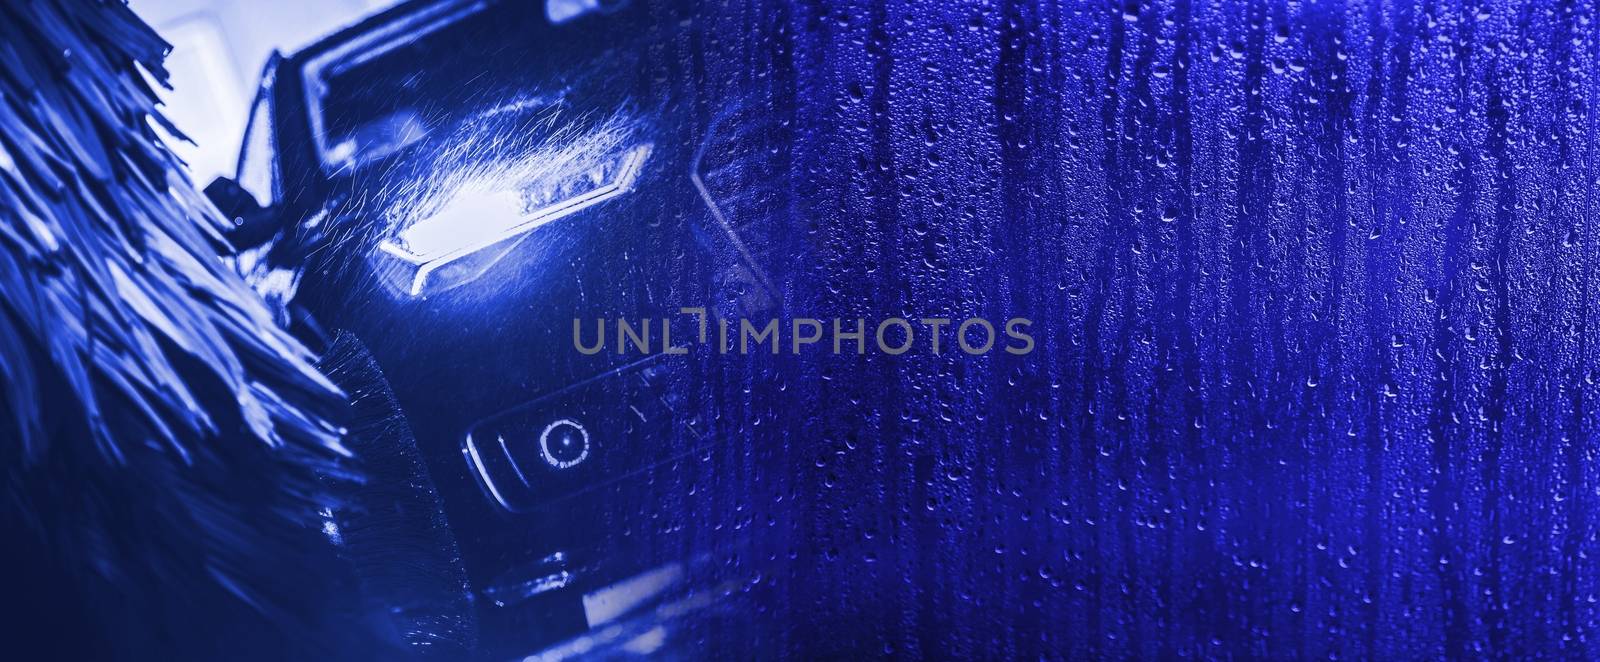 Washing Car Banner Background by welcomia